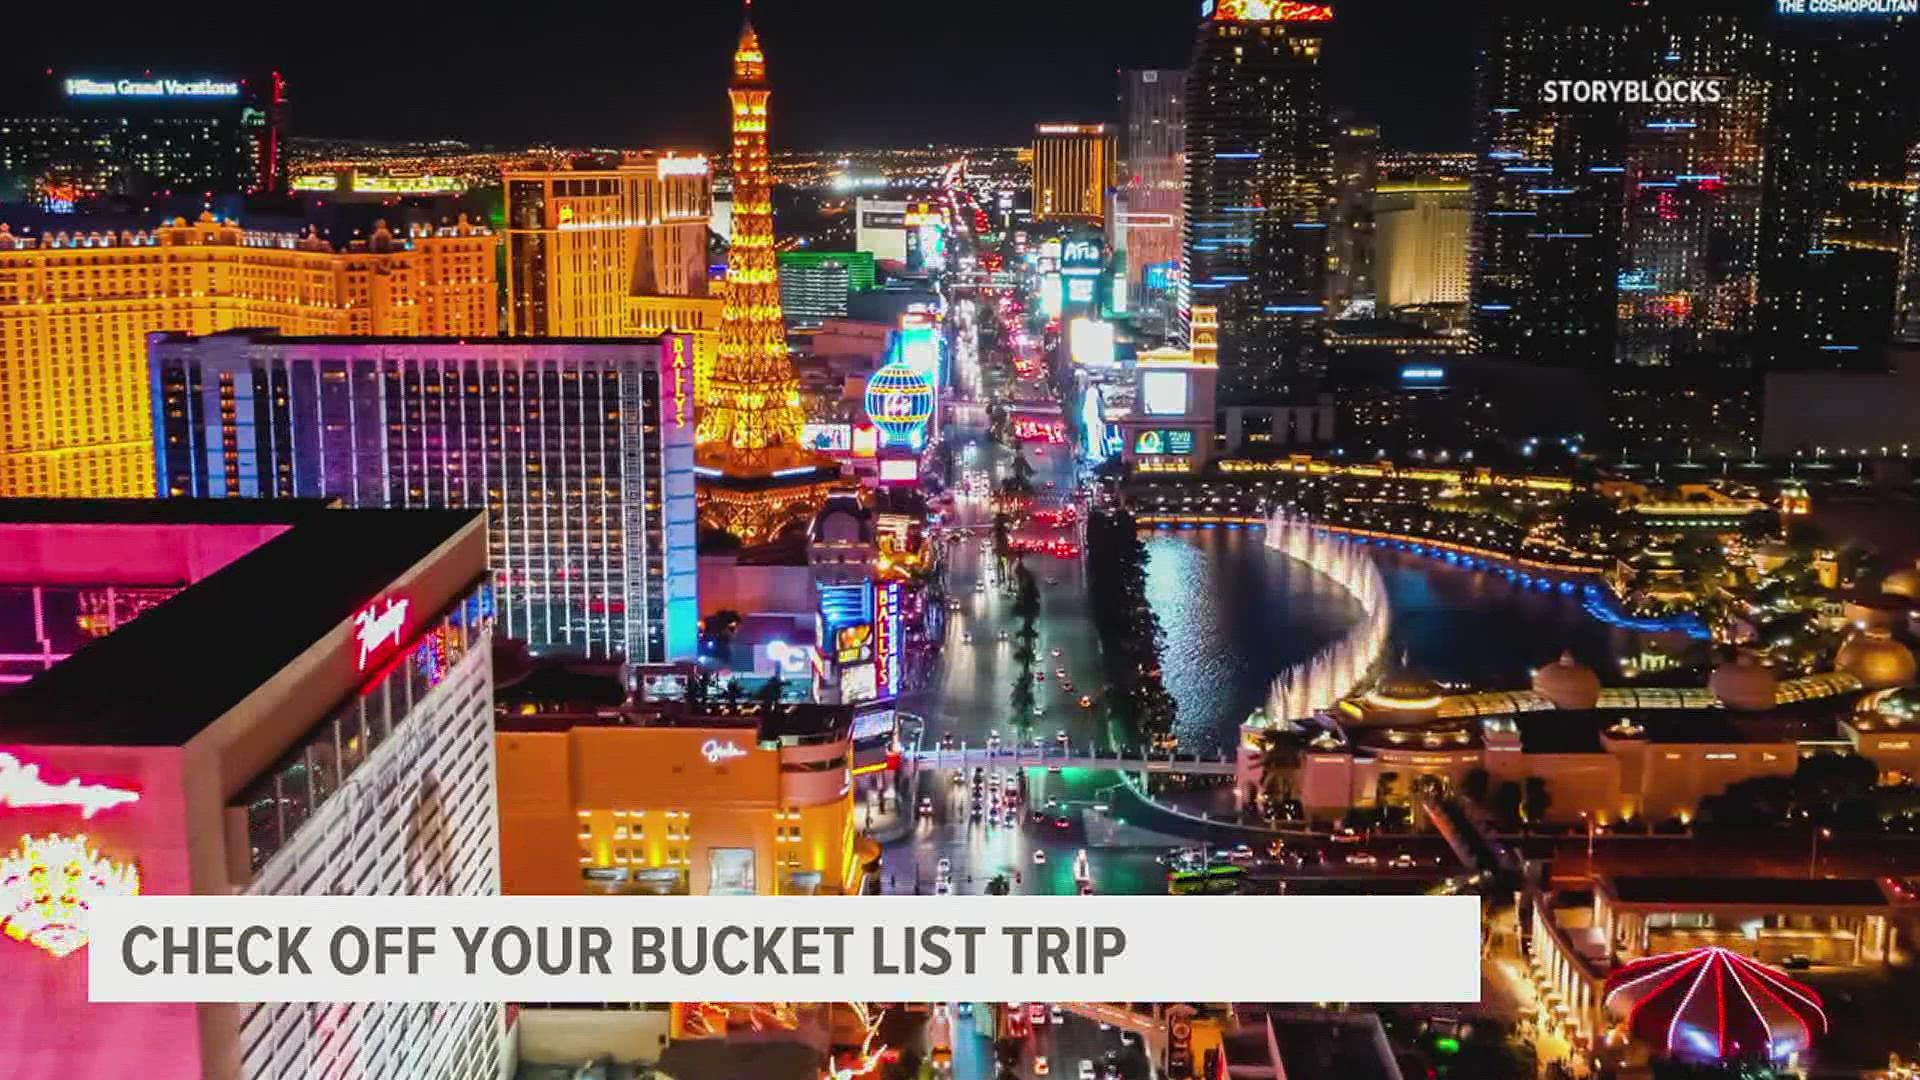 Finance expert Patrice Washington gives advice on how to plan your bucket list trip in 2021 and how to save money while doing it.